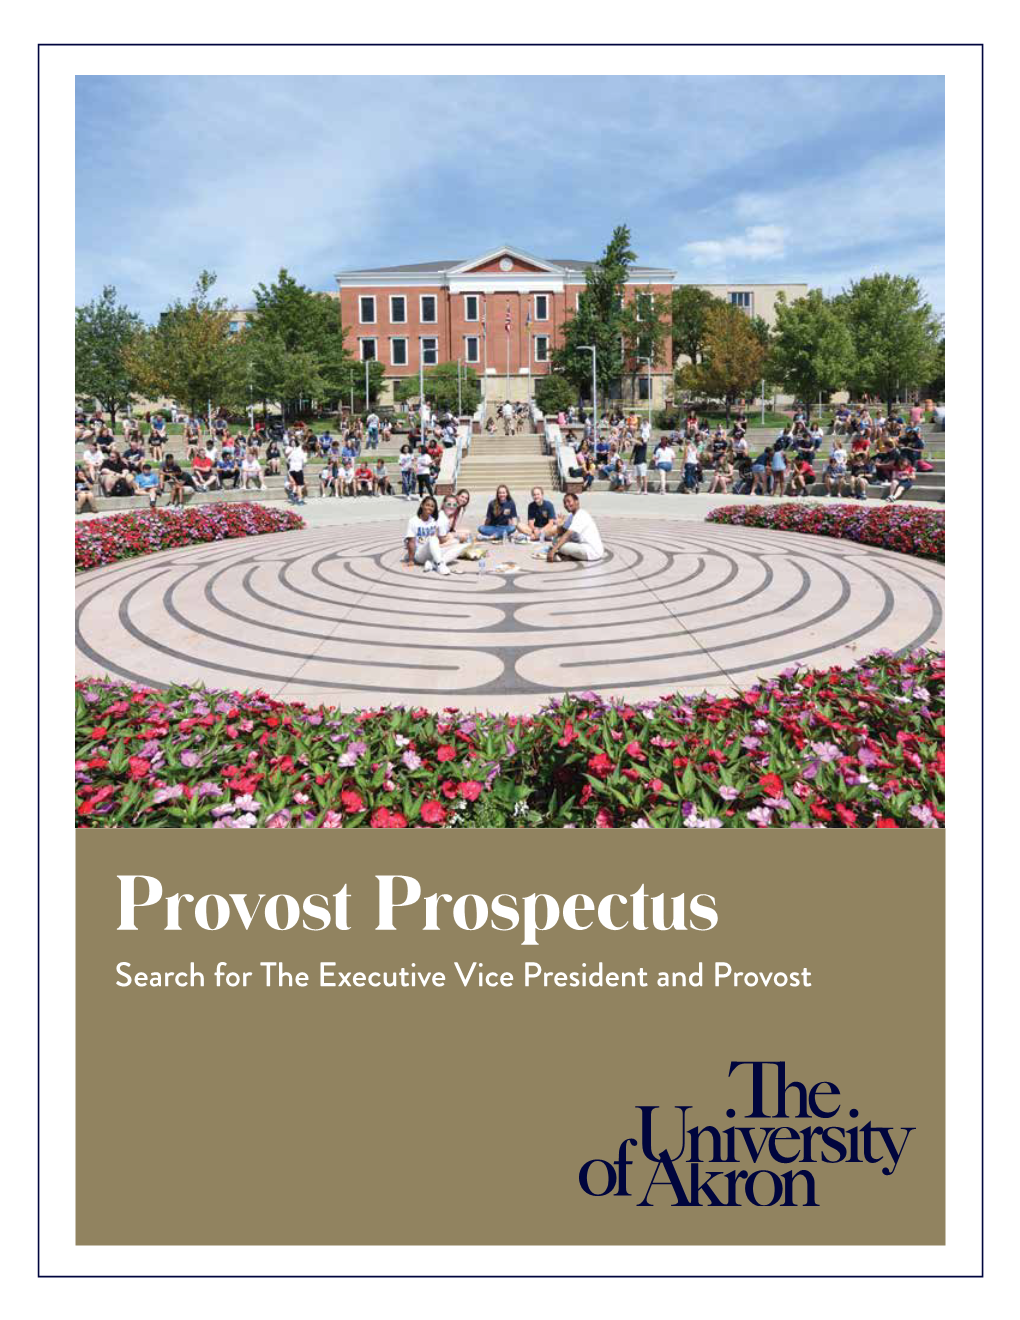 The Search for the Executive Vice President and Provost